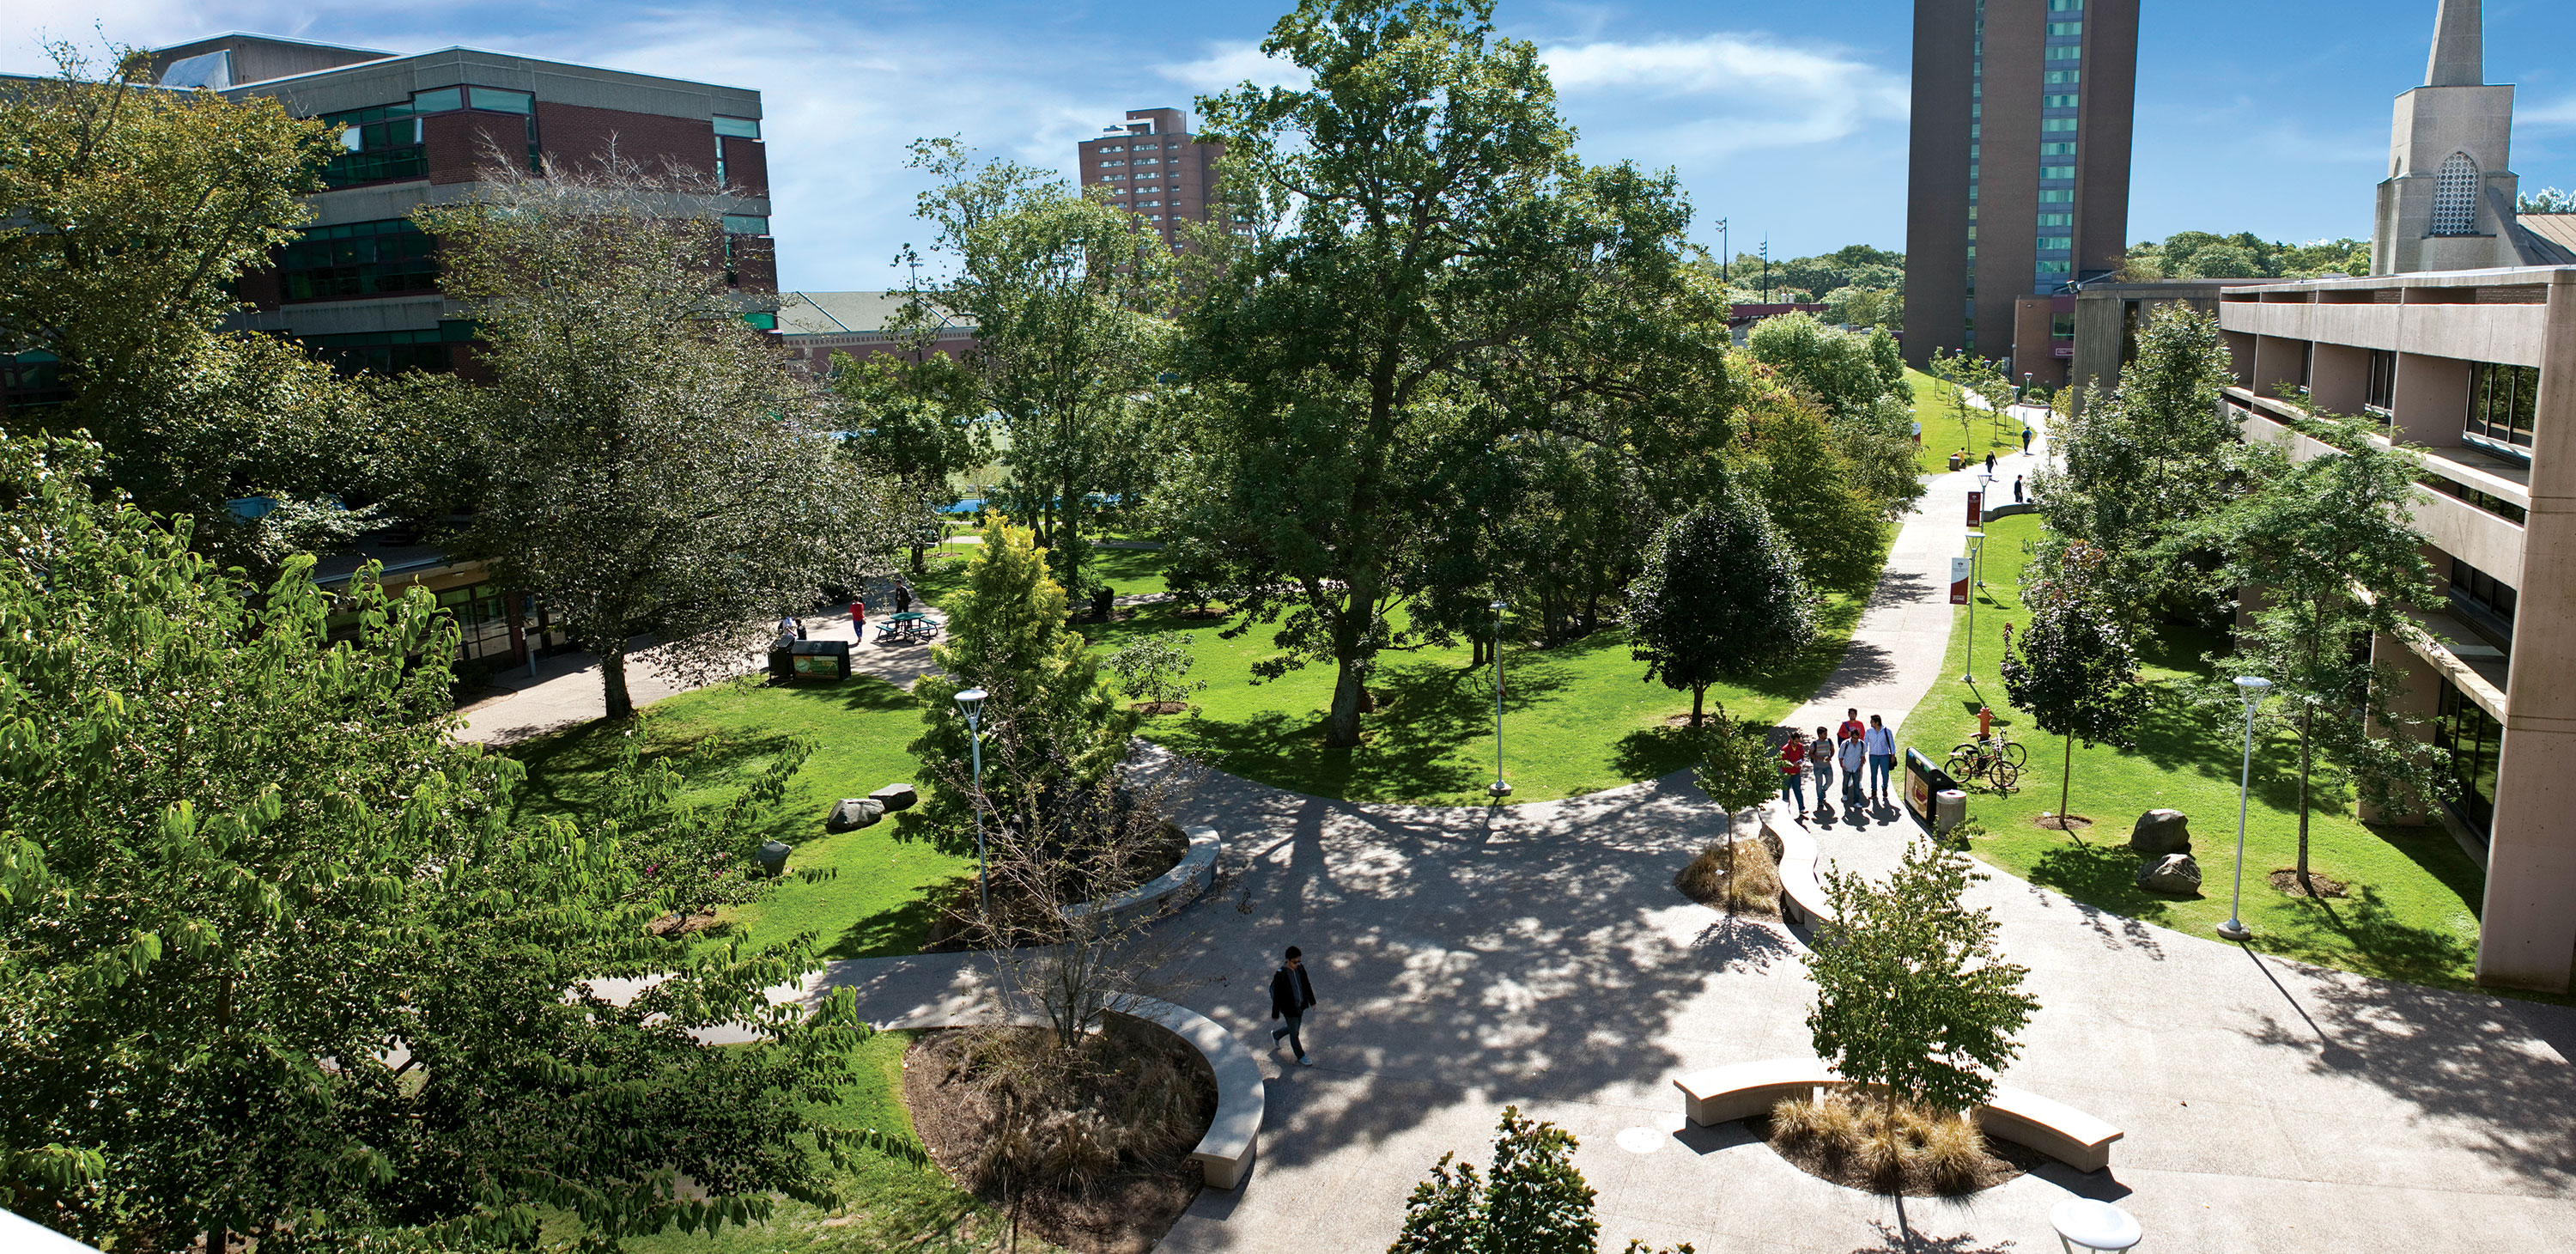 Students walking through the Quod on a sunny afternoon. Shot from above.